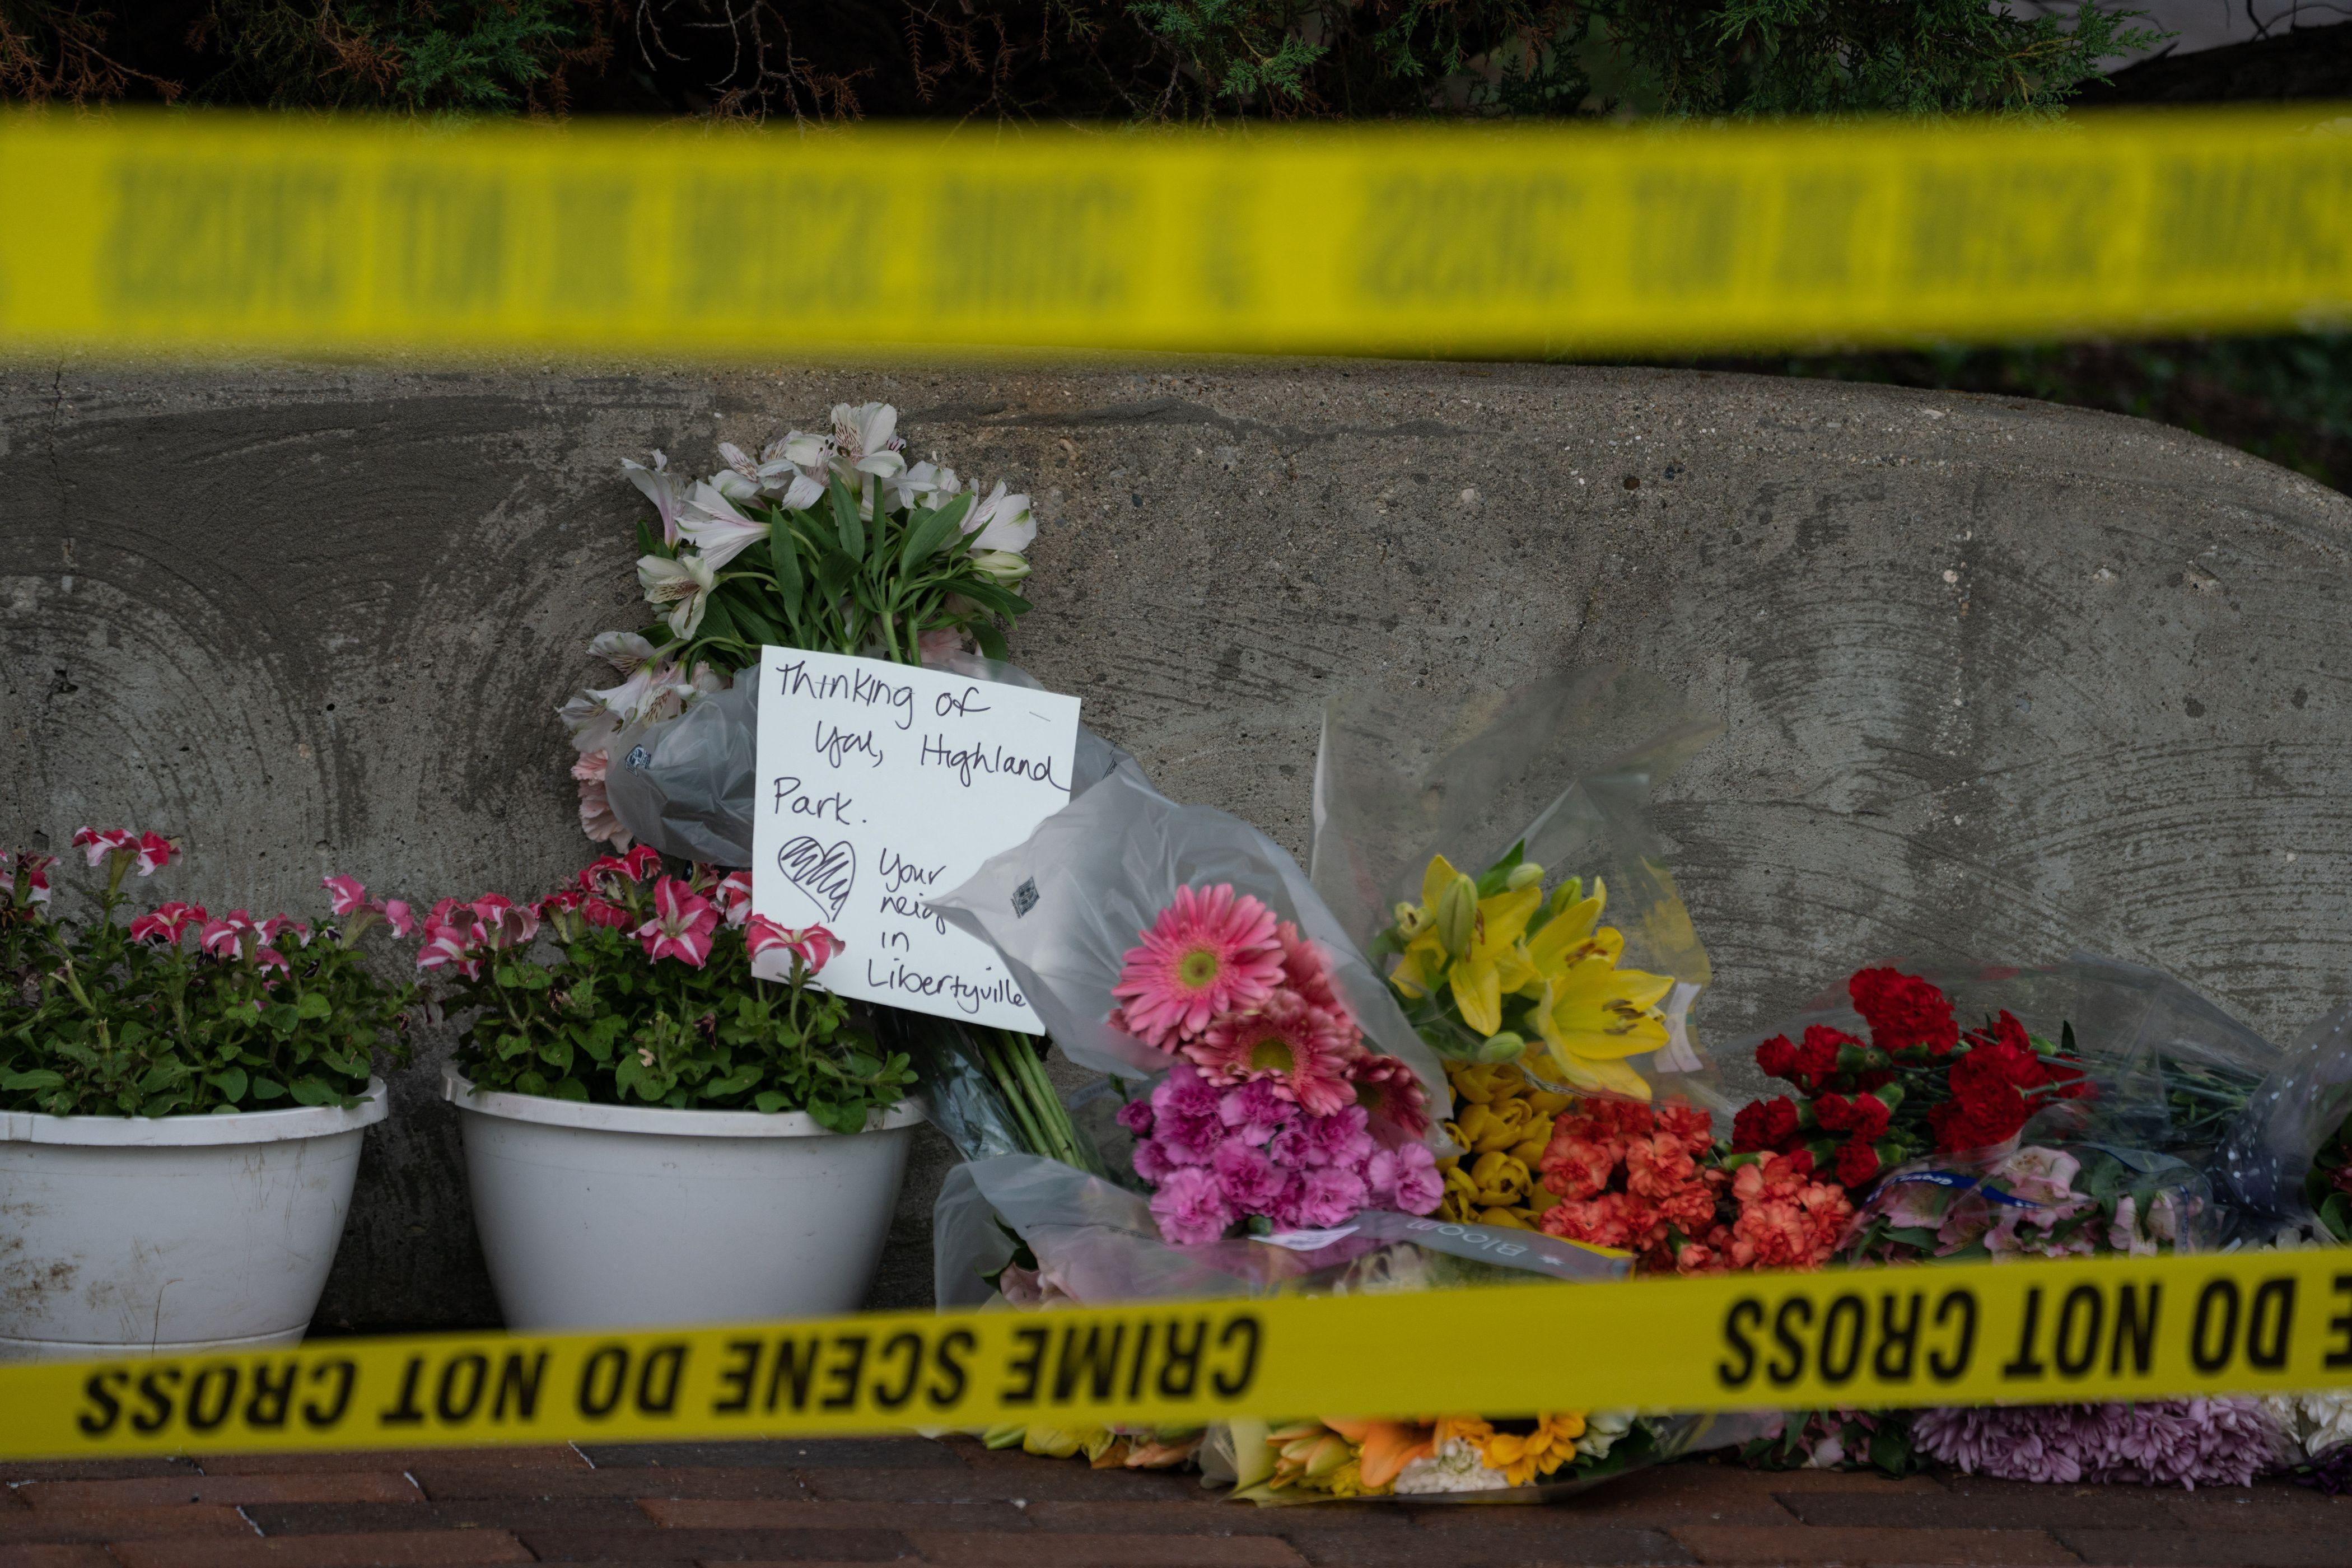 Bouquets of flowers laid on the grown, seen behind yellow police tape.